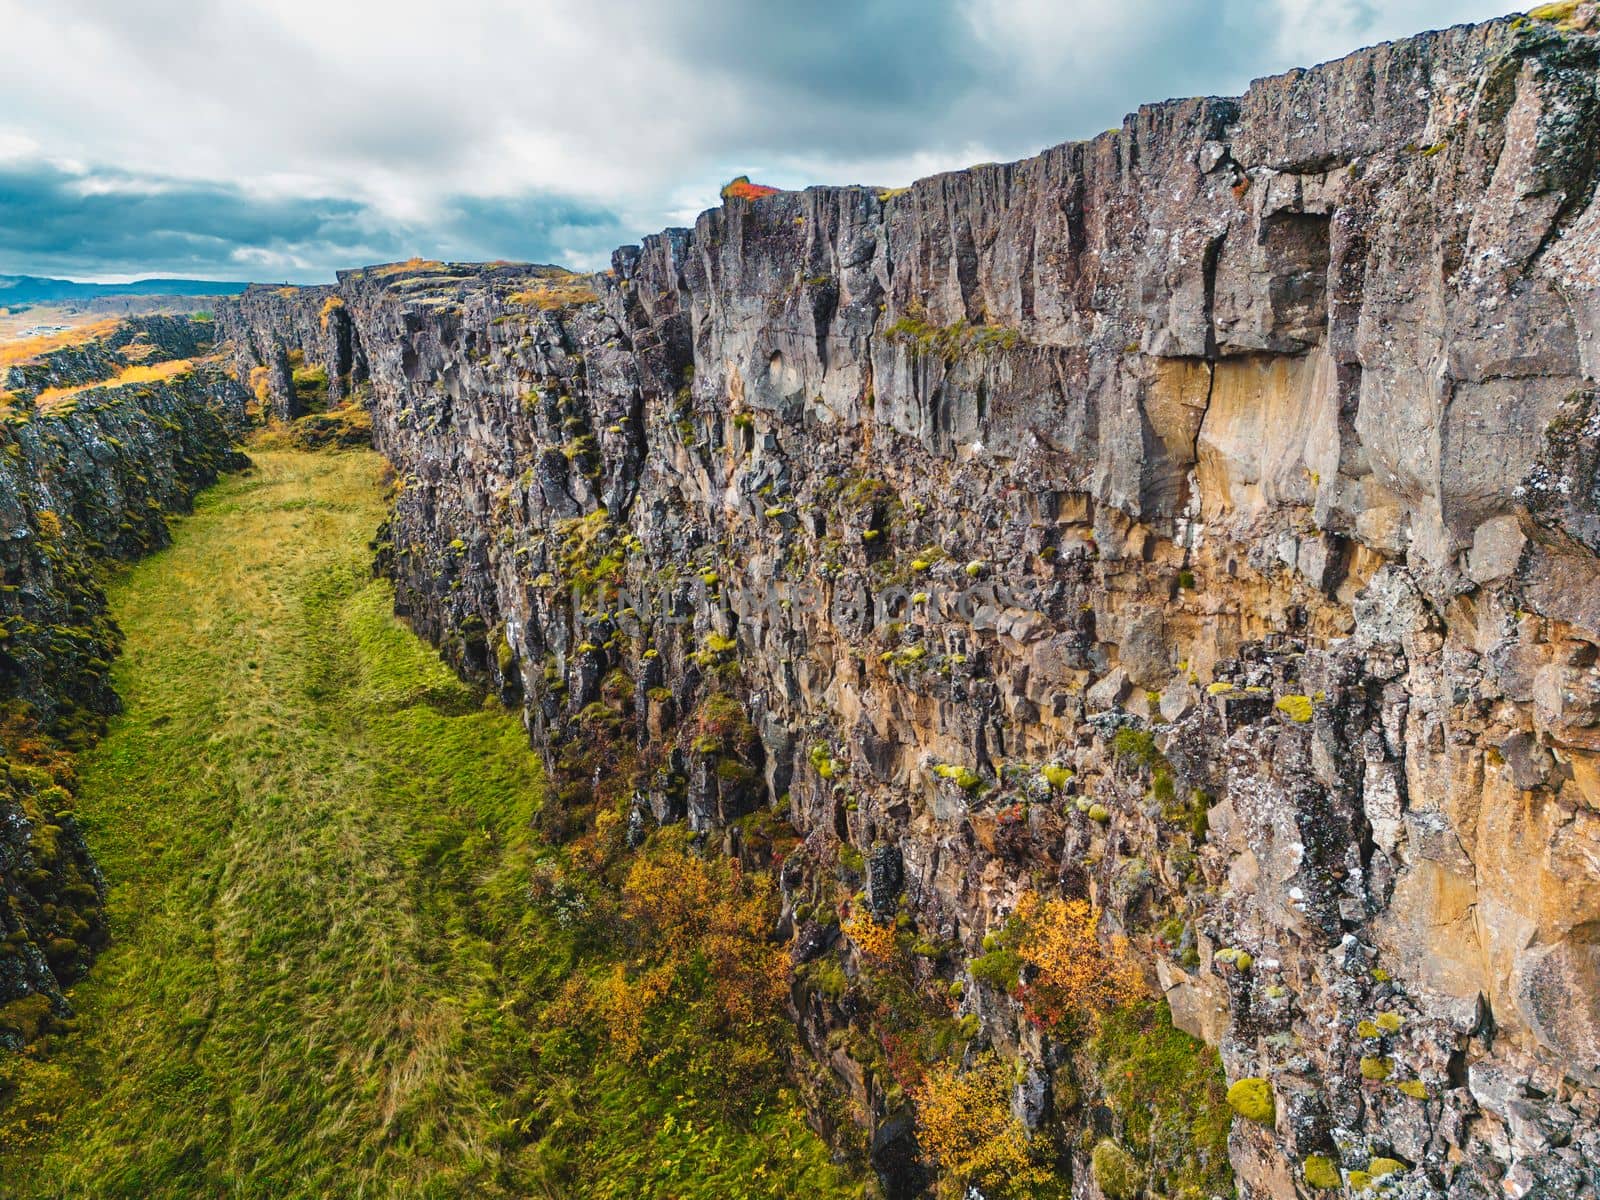 Aerial view of Thingvellir National Park - famous area in Iceland right on the spot where the Atlantic tectonic plates meets. UNESCO World Heritage Site, western Iceland, and site of the Althing. High quality photo